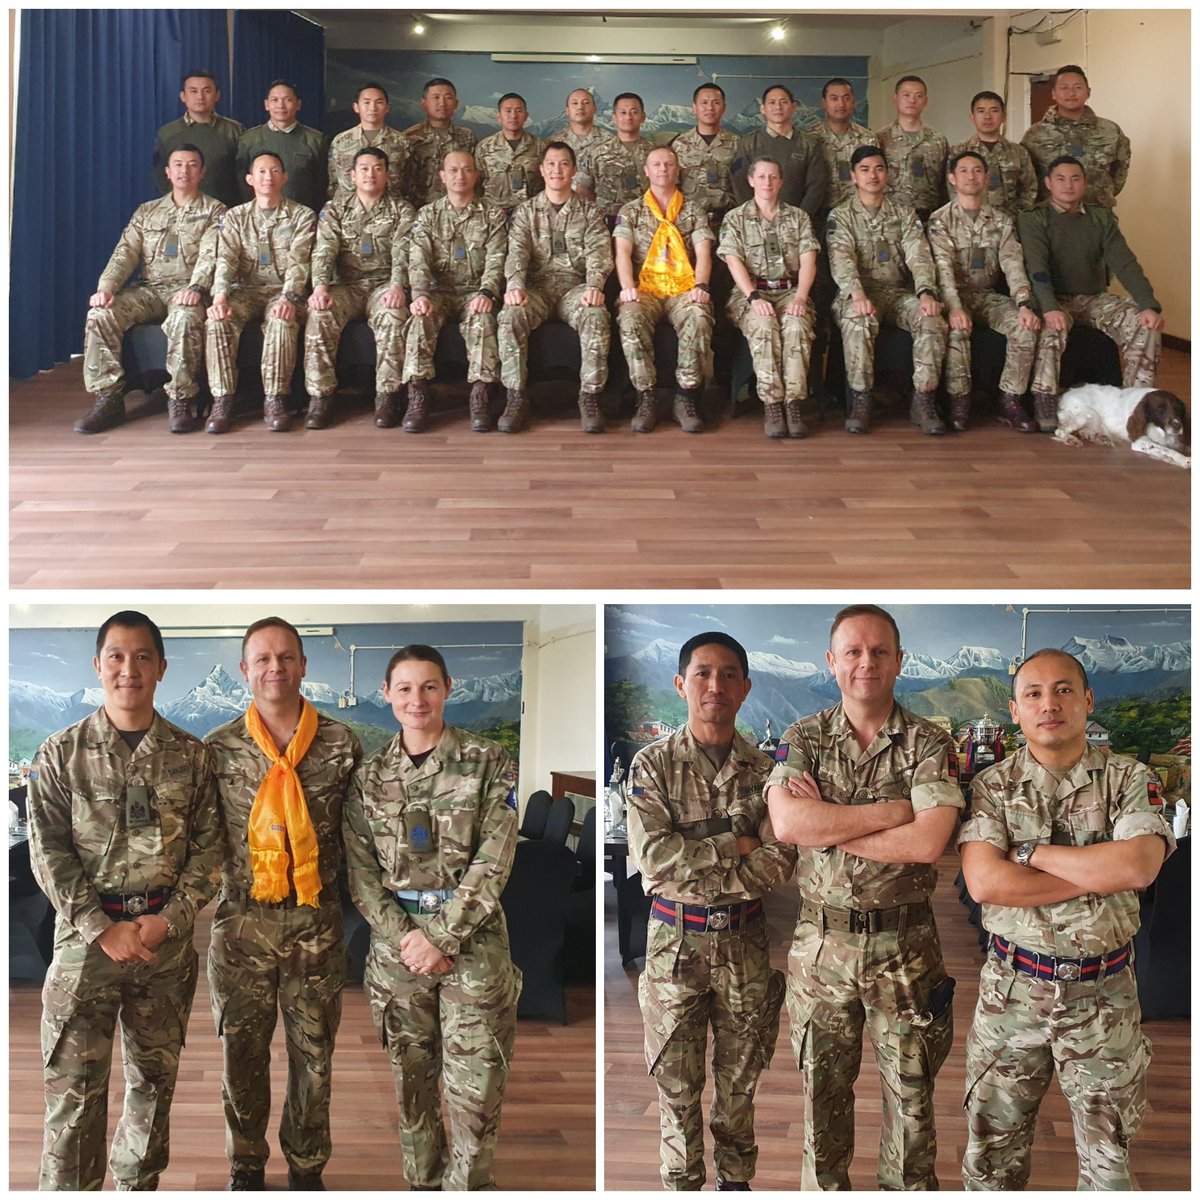 Today I had the privilege of visiting @30SigRegt and @QG_SIGNALS, I was simply blown away by them. An outstanding team with an amazing sense of belonging, it was humbling to sample some of their fantastic traditions, tremendous history and culture. Dhanyabaad for looking after me